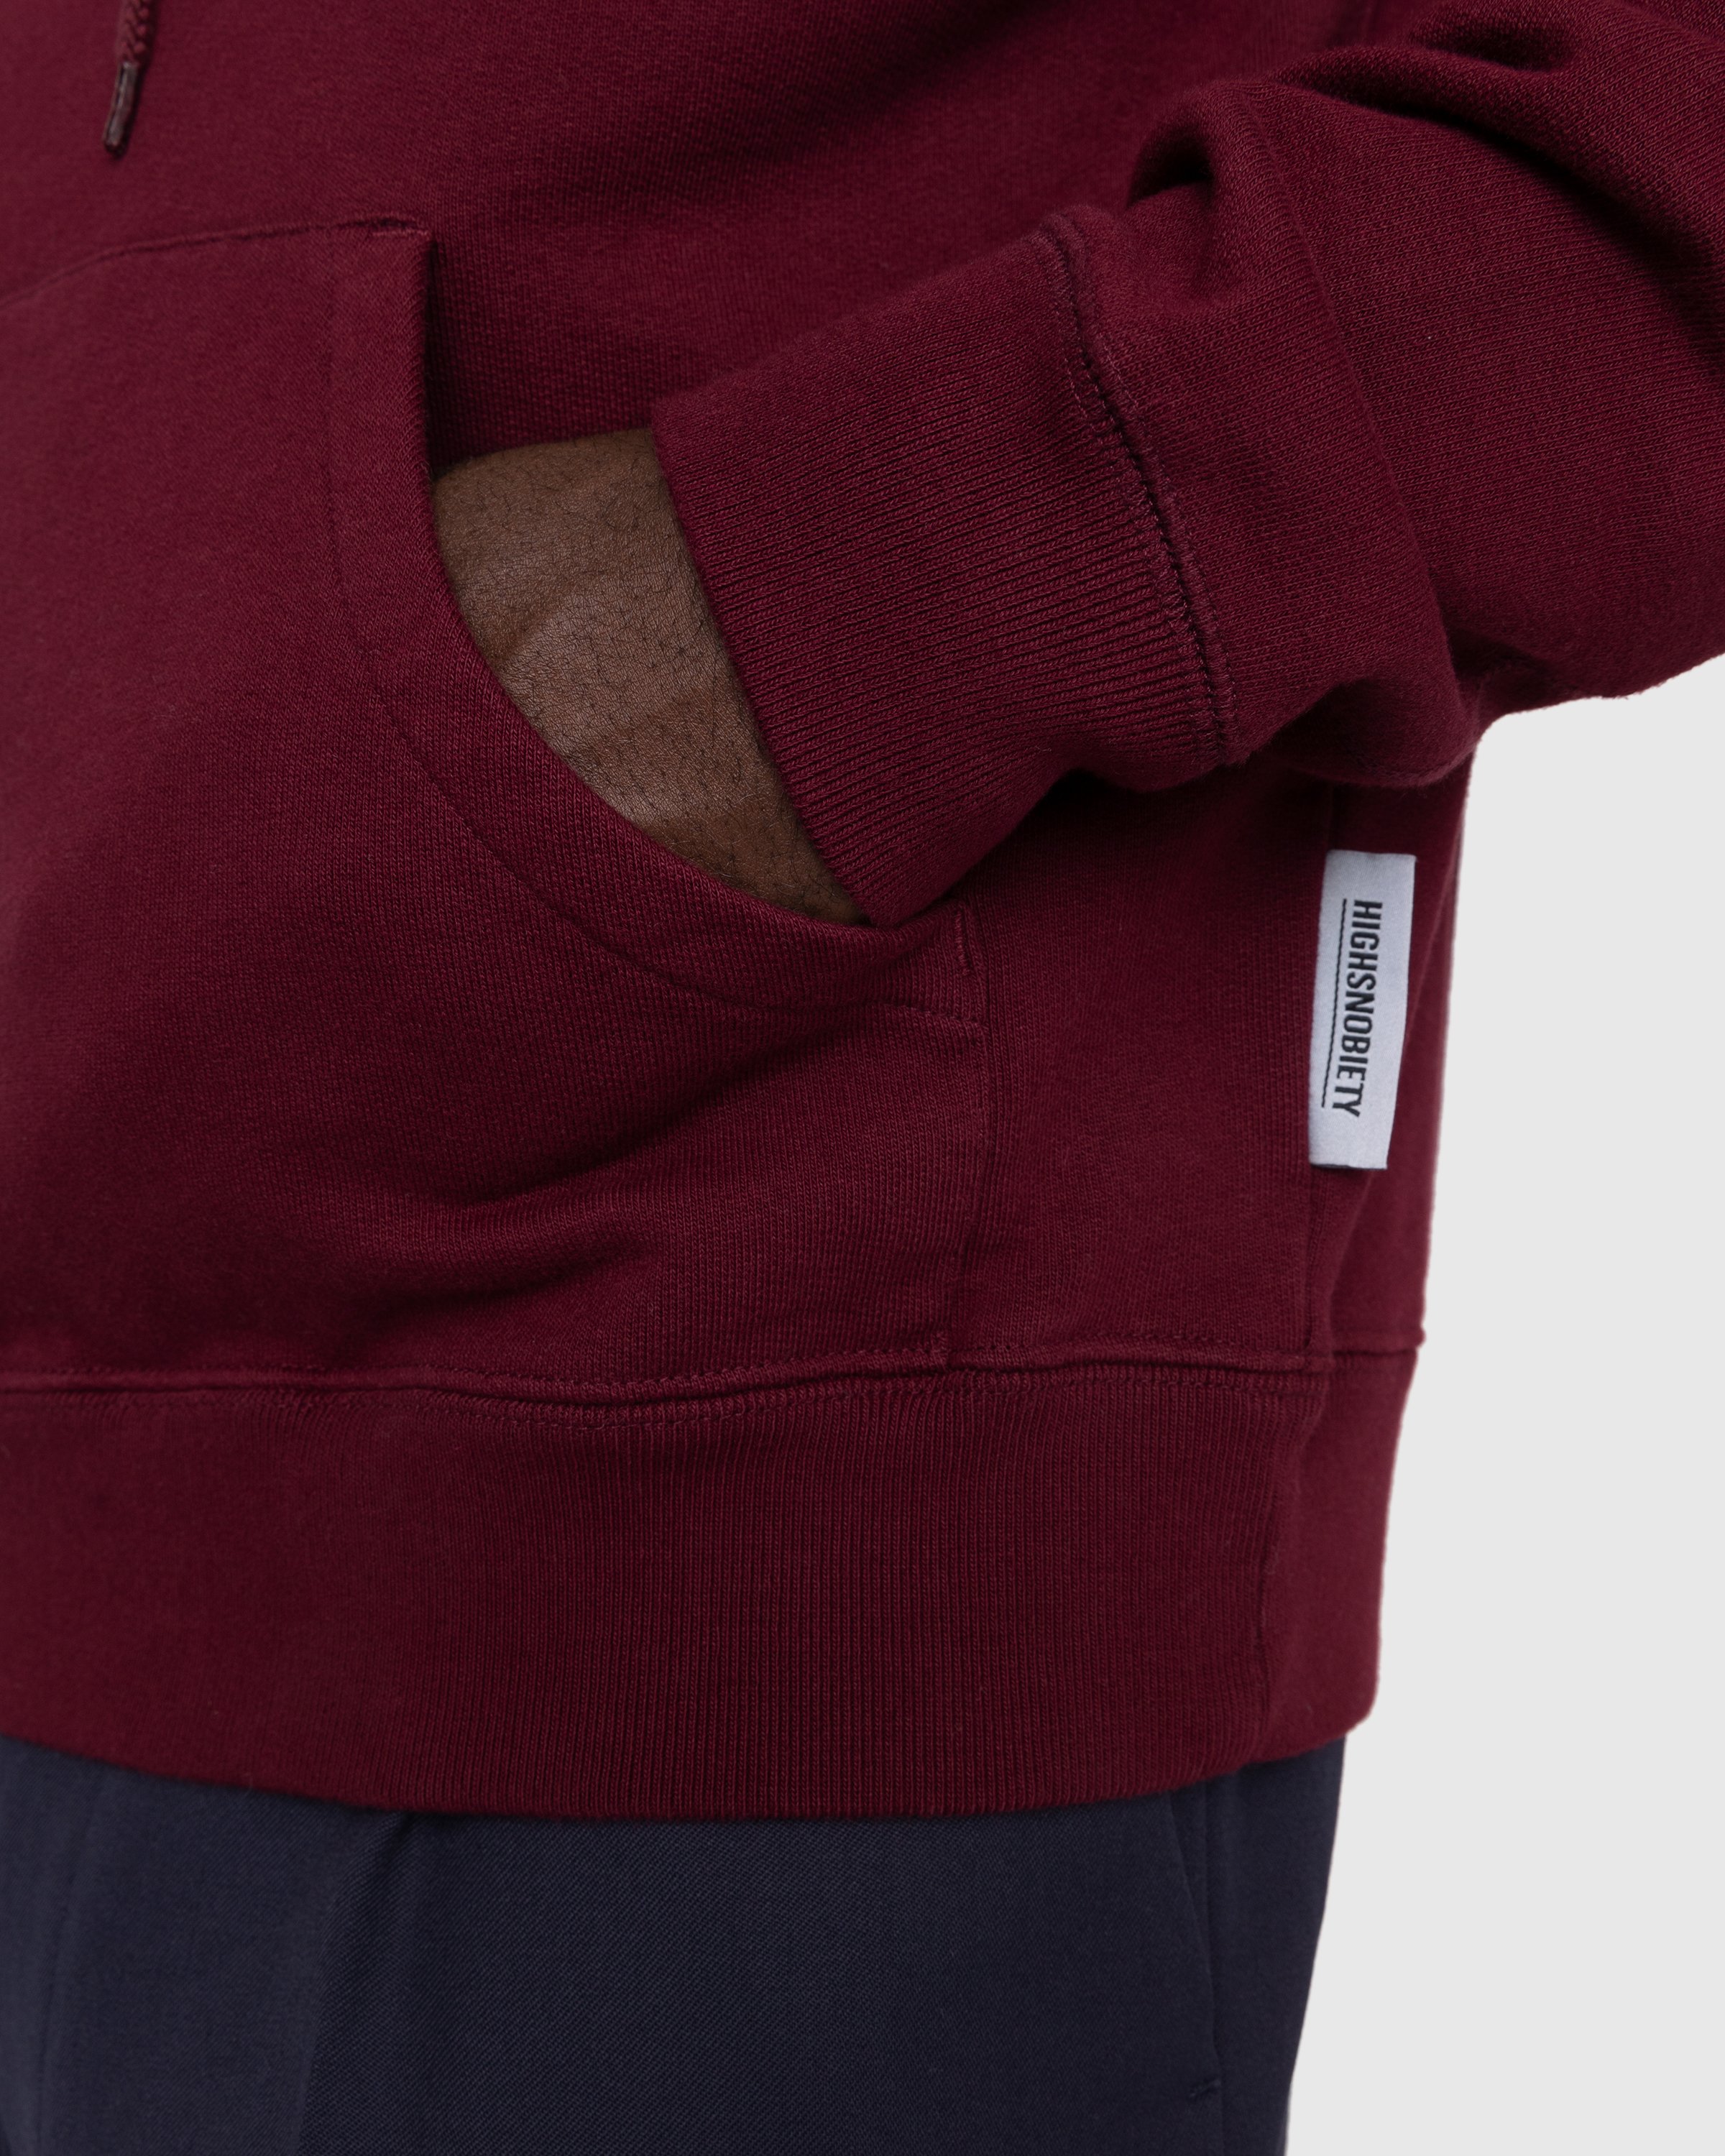 Highsnobiety - Classic Fleece Hoodie Bordeaux - Clothing - Red - Image 6